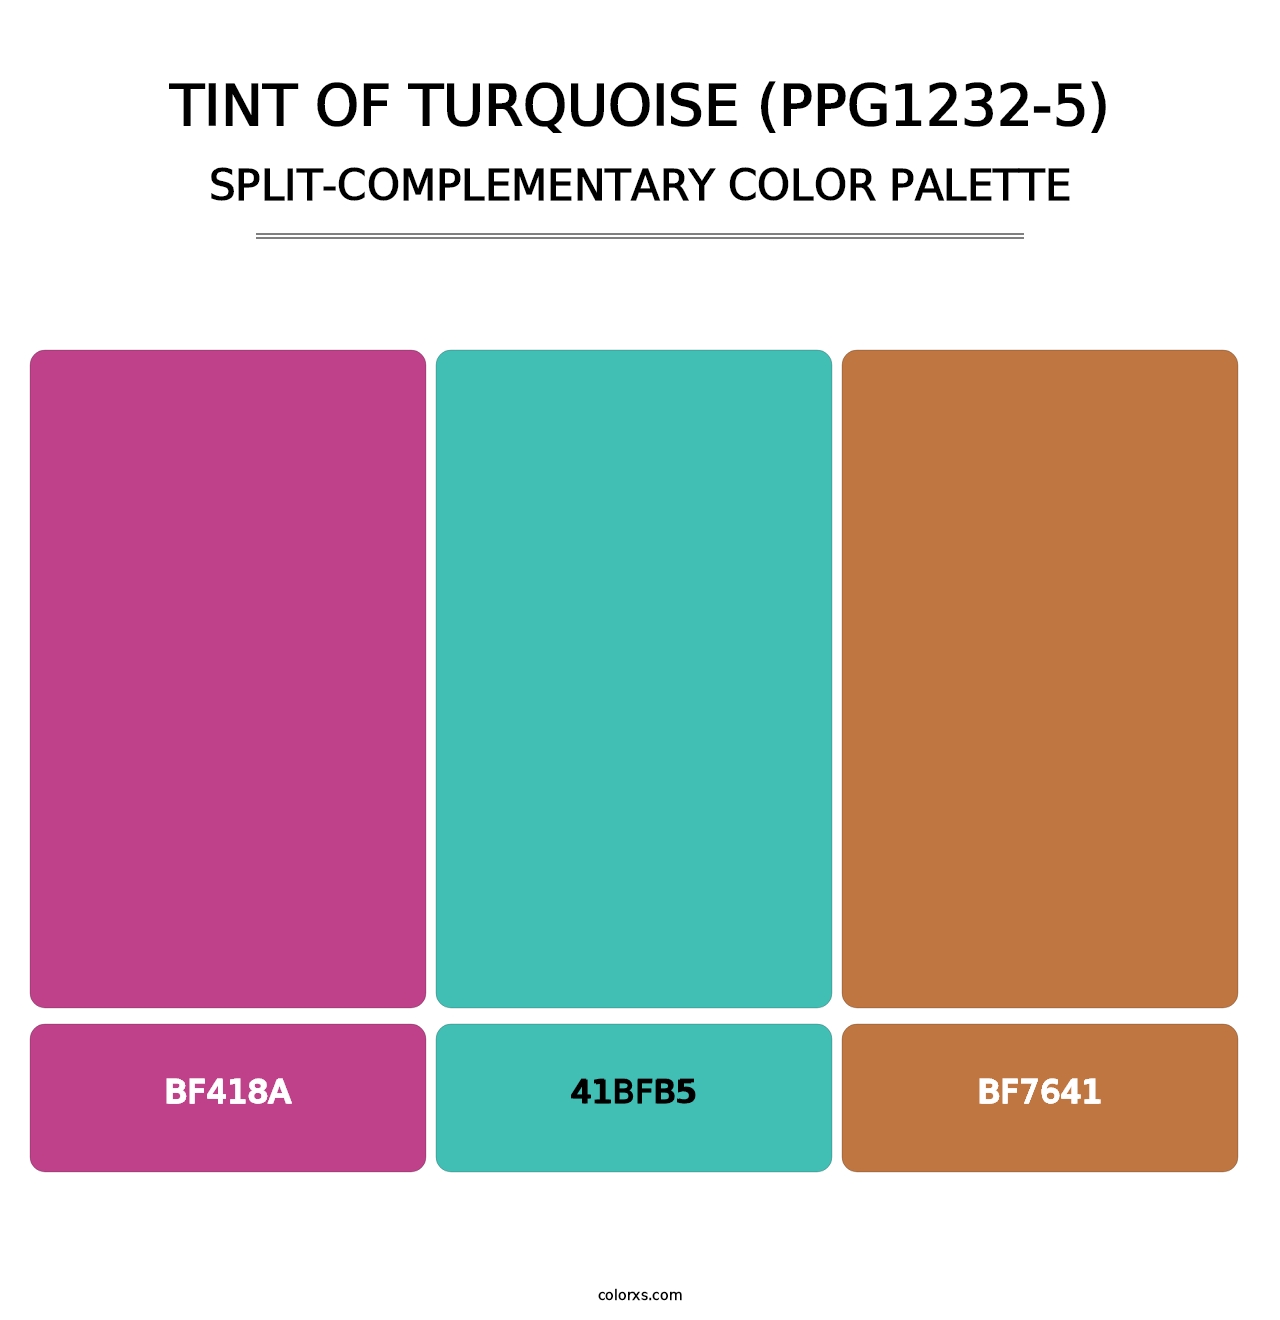 Tint Of Turquoise (PPG1232-5) - Split-Complementary Color Palette